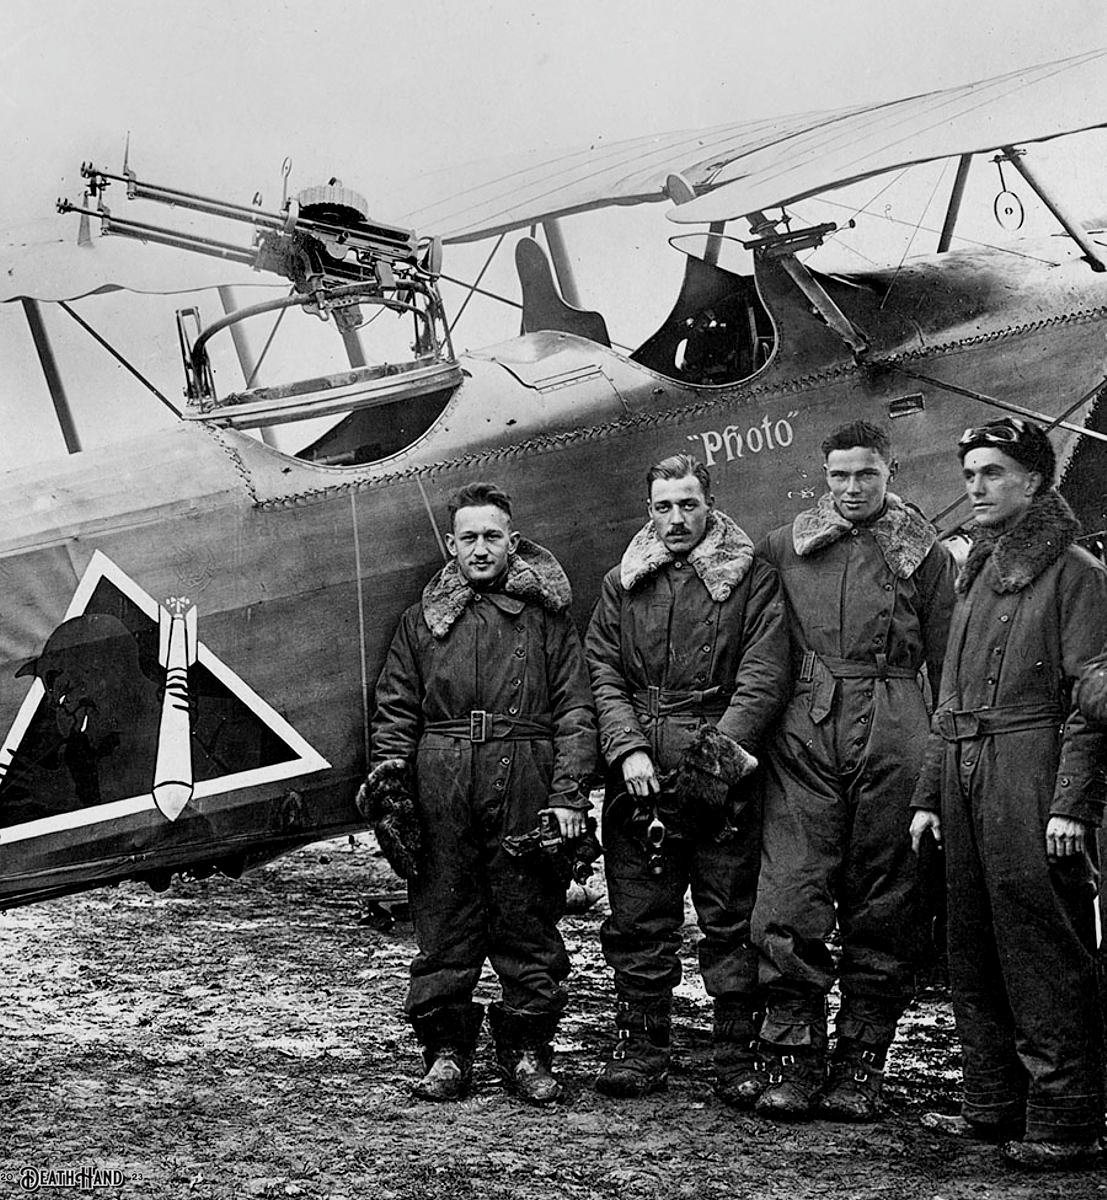 DH - Members of the U.S. 96th Aero Squadron pose before one of their Breguet 14B2 bombers on N...jpg